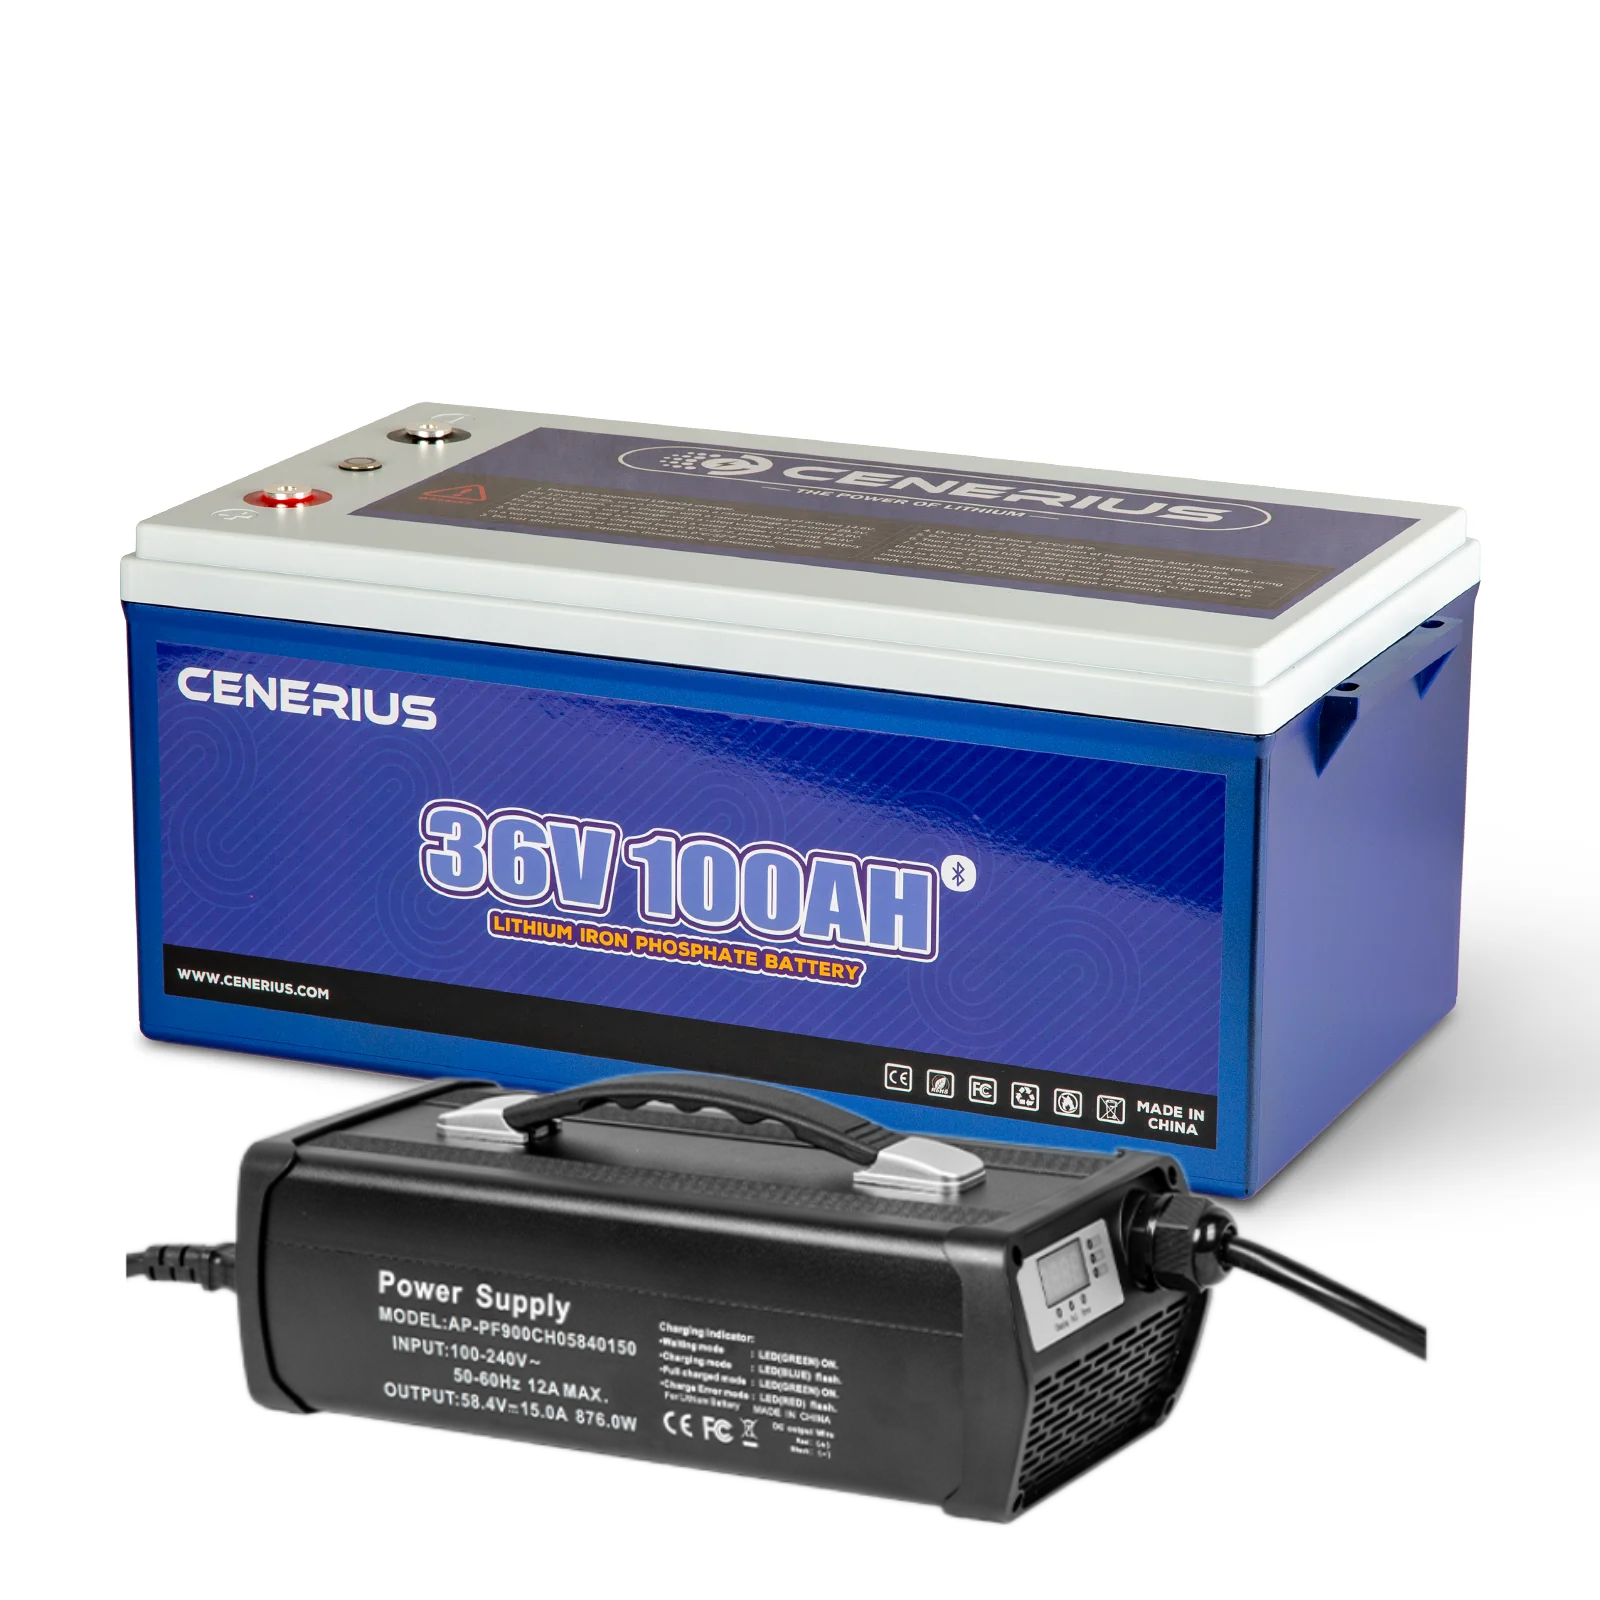 Cenerius 36V 100Ah LiFePO4 Lithium Battery with Bluetooth, Built In 100A BMS,3840Wh Energy,Peak Current 500A,High & Low Temp Protection Deep Cycle Rechargeable,only about 1/3 of the volume and mass of lead-acid batteries, 10 Years Lifetime Warranty,Perfect for golf carts, boat trolling motors, RVs, camping and many other applications